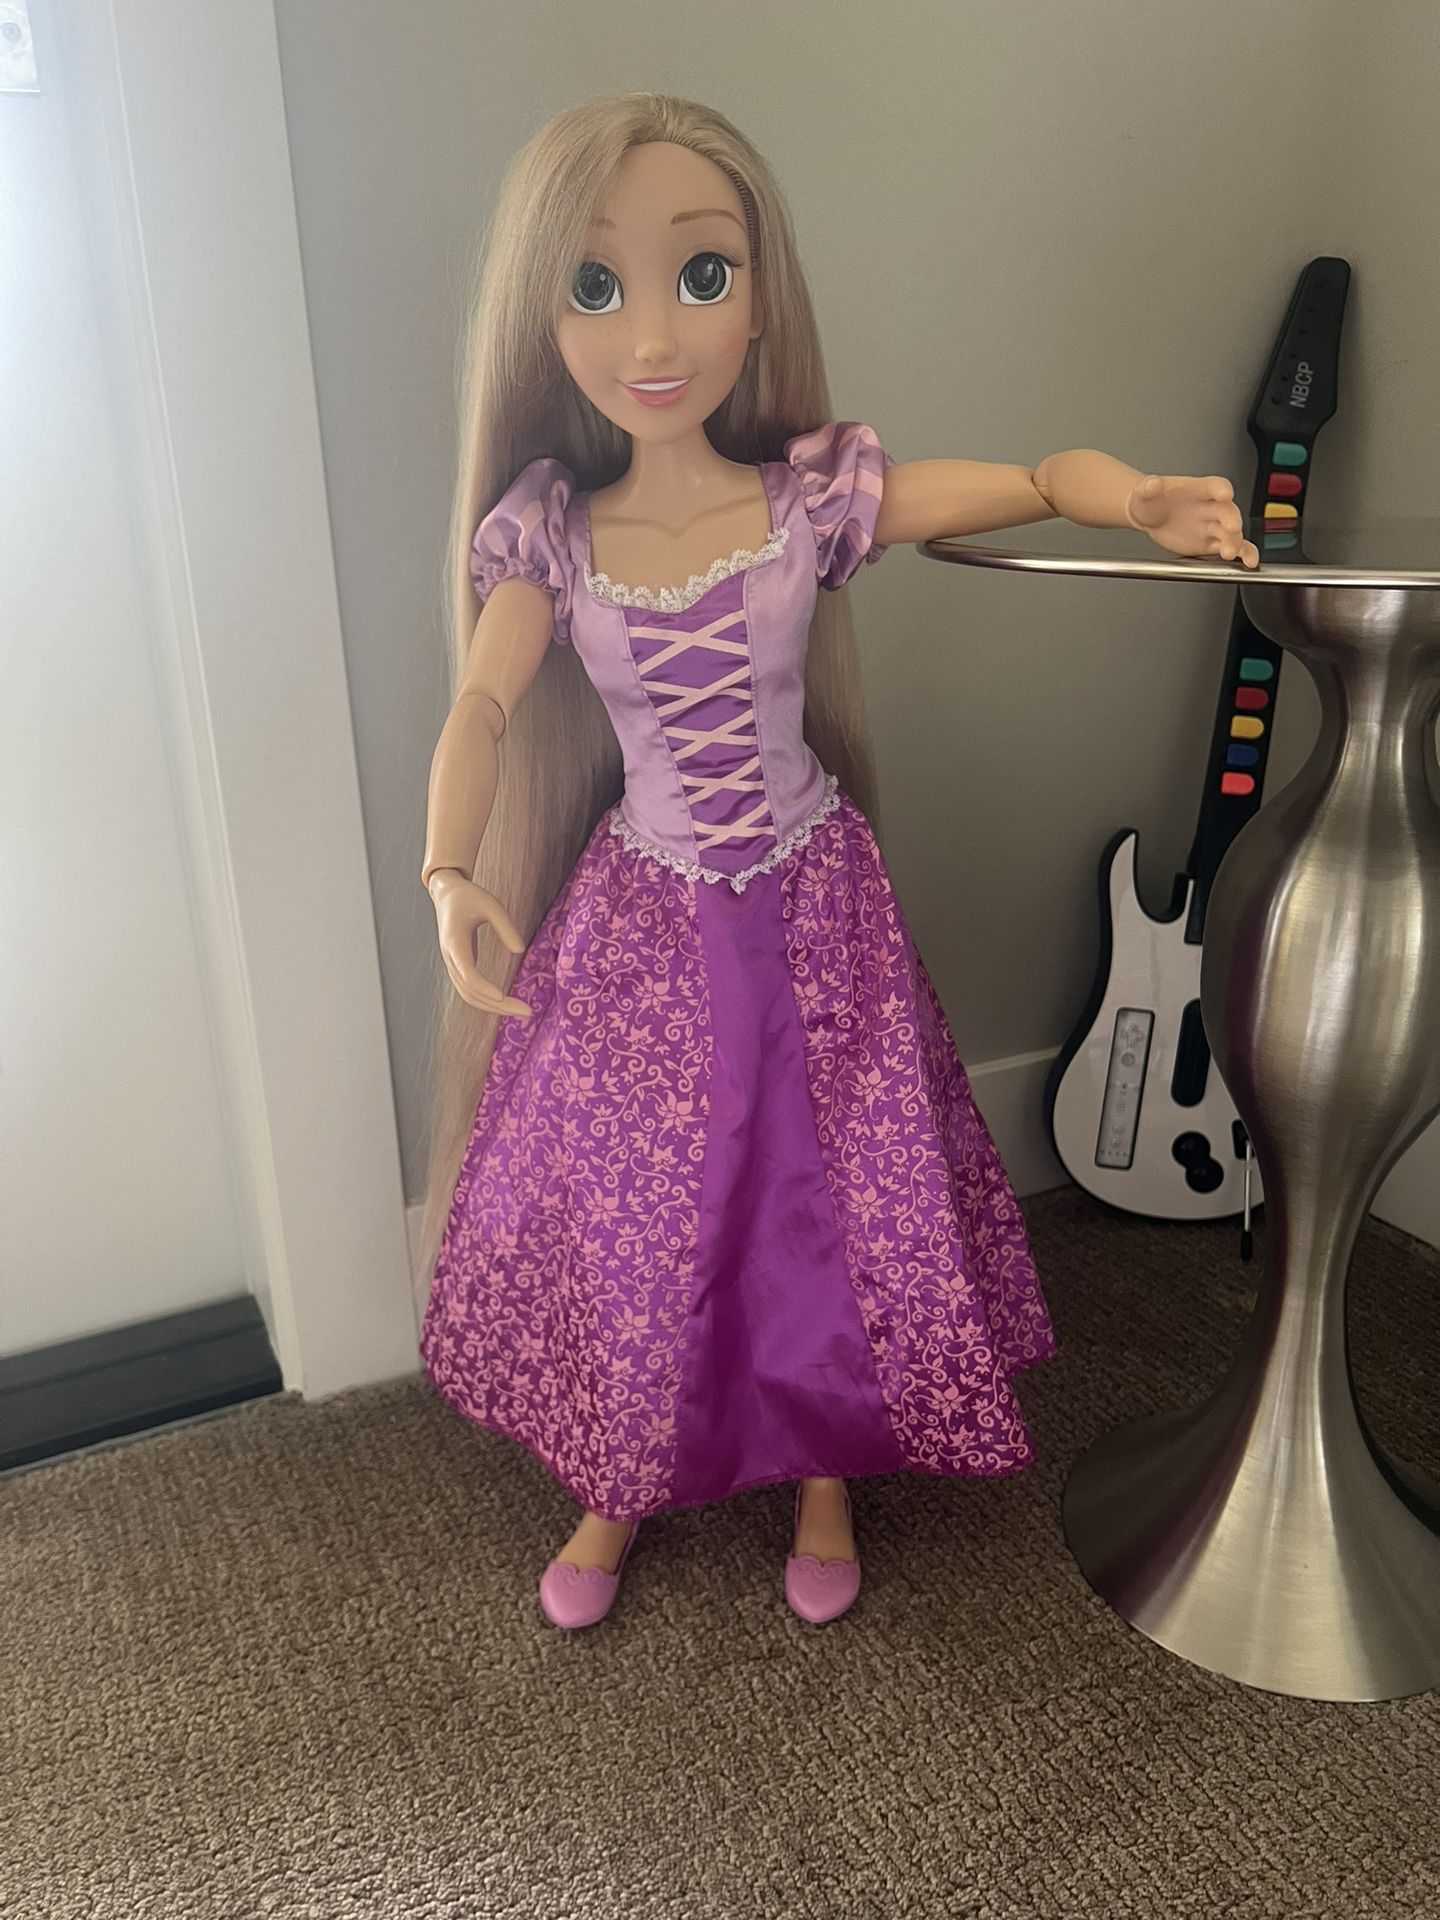 Disney Princess Rapunzel 32” Play date, My Size Articulated Doll